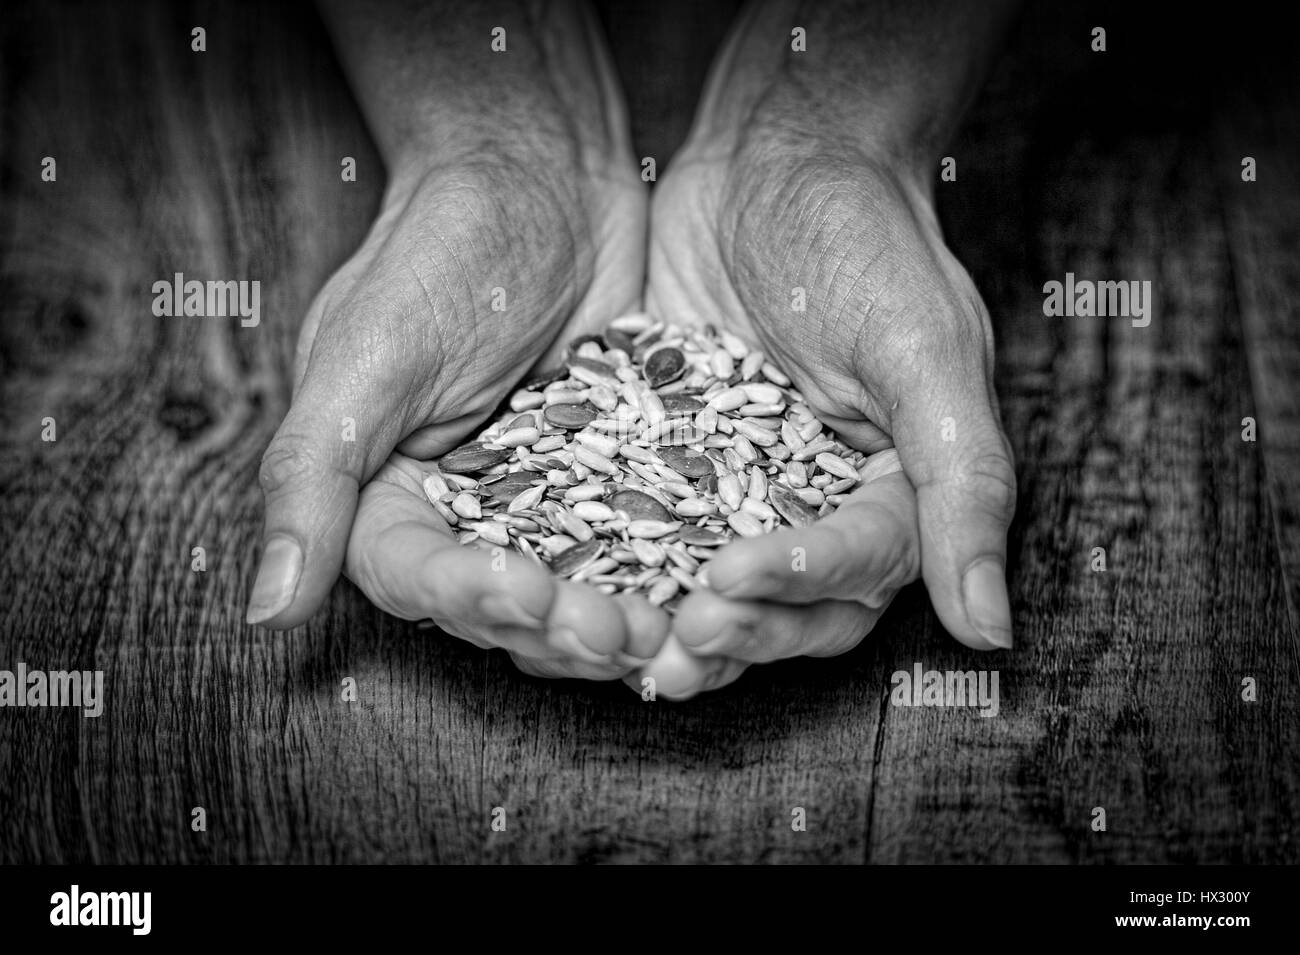 handful of seeds and nuts Stock Photo